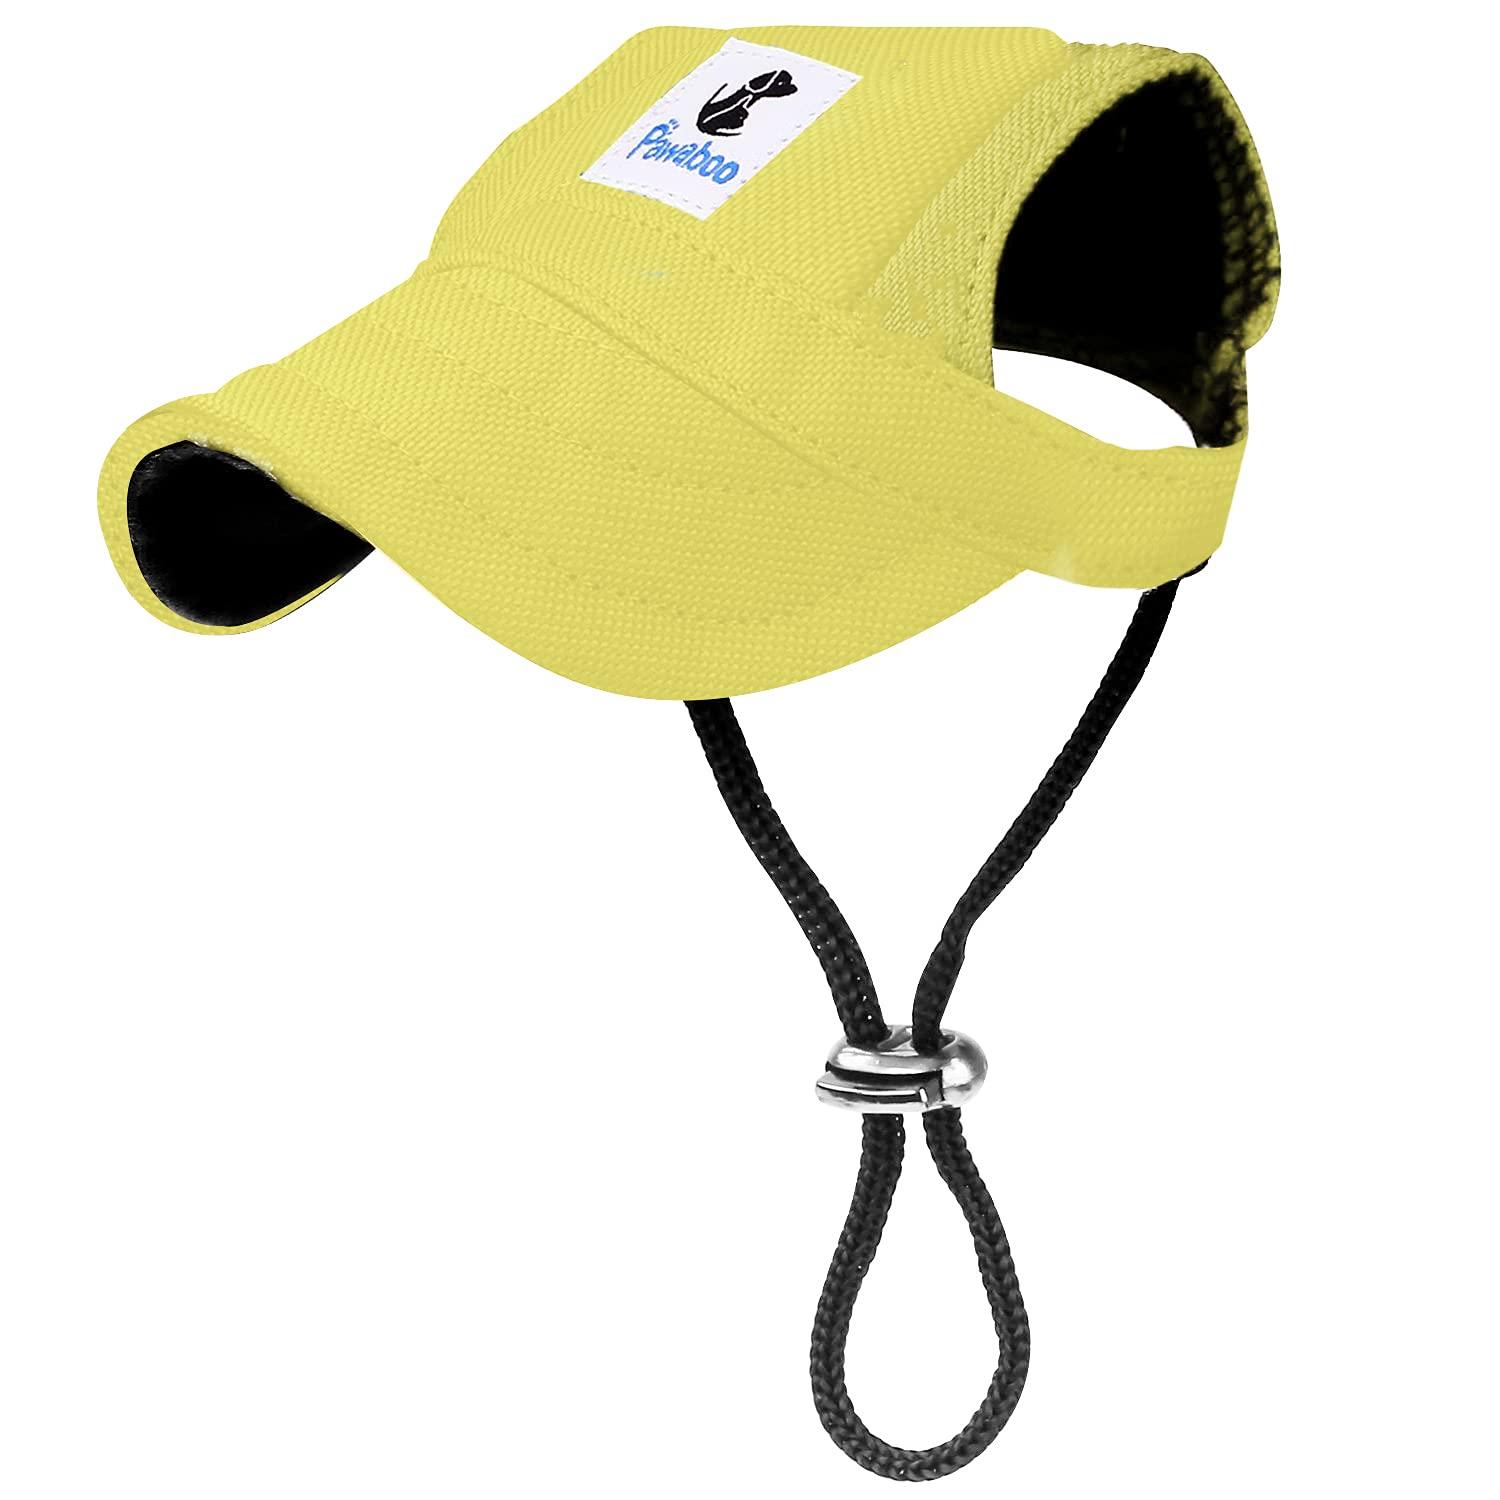 Pawaboo Dog Baseball Cap, Adjustable Dog Outdoor Sport Sun Protection Baseball Hat Cap Visor Sunbonnet Outfit with Ear Holes for Puppy Small Dogs, XL, Yellow